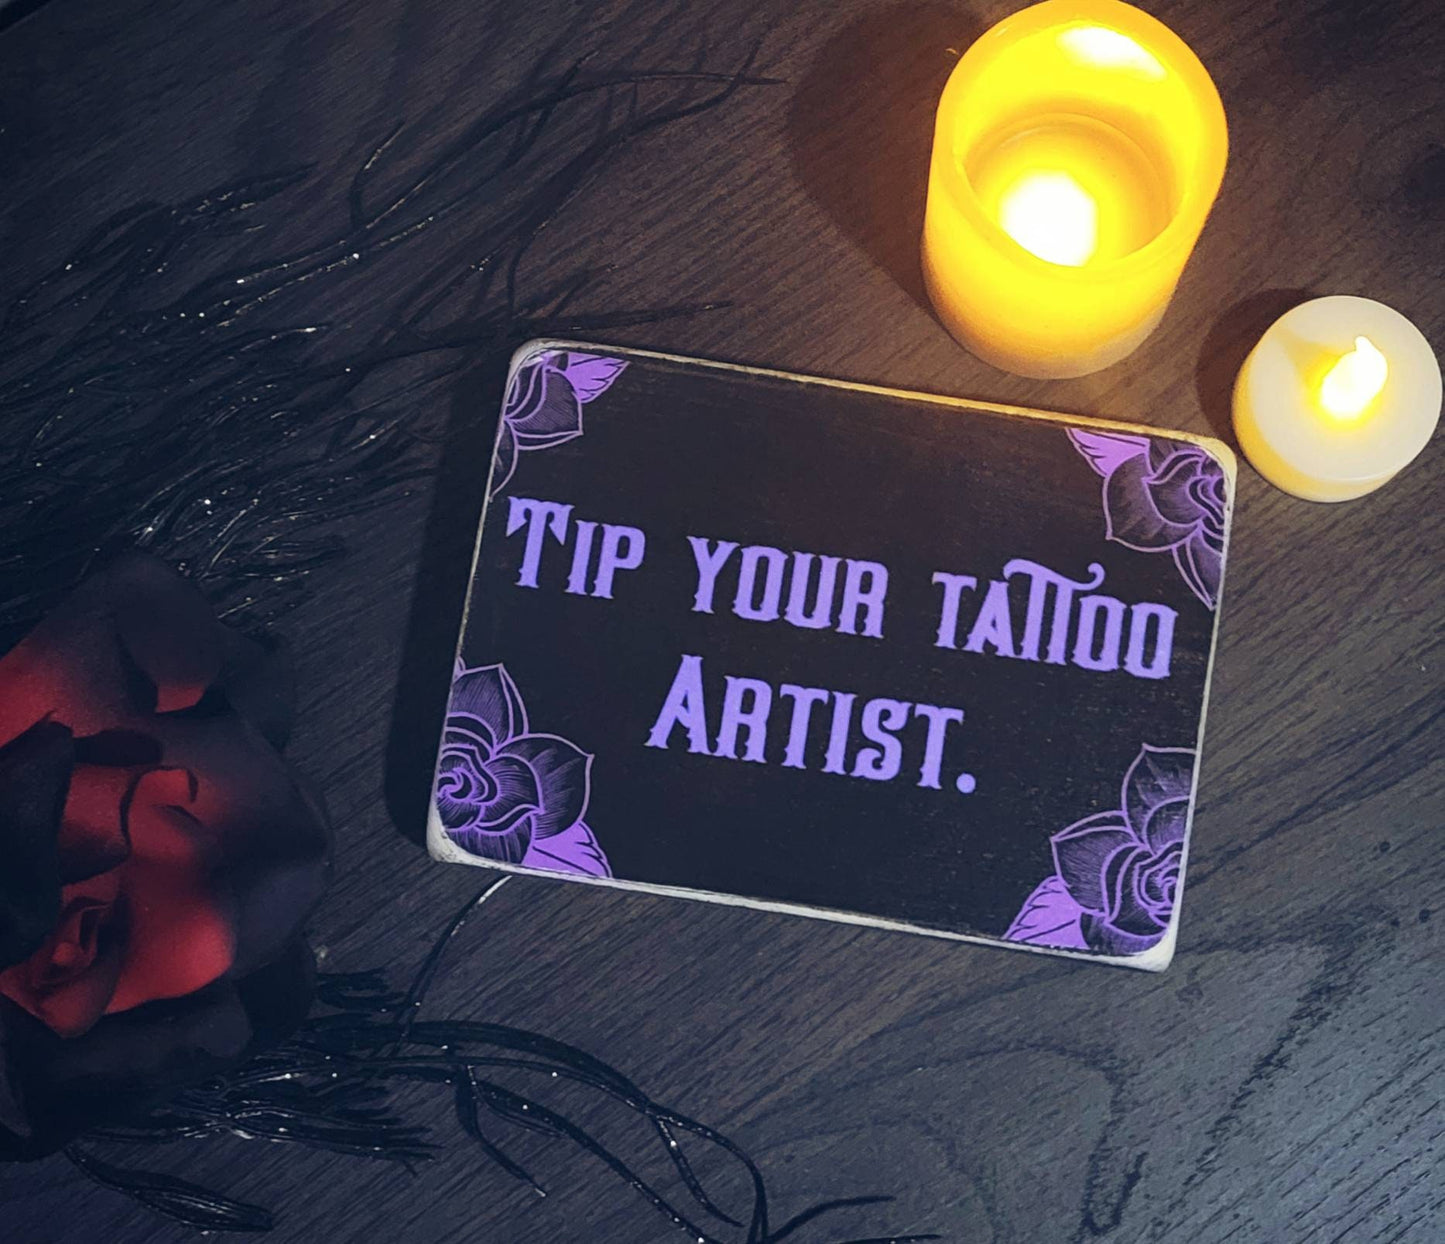 Tip your tattoo artist box sign